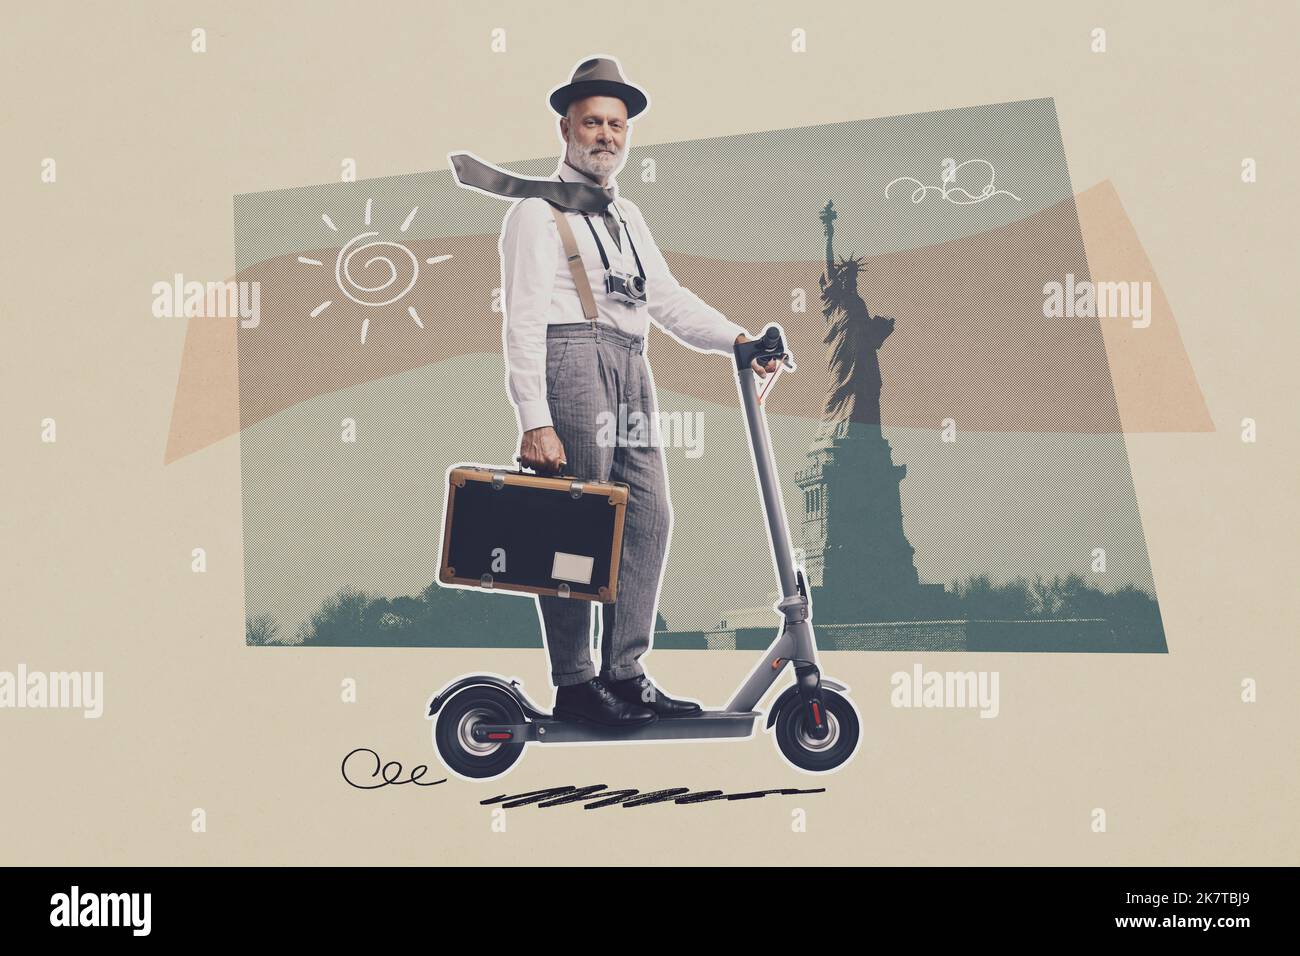 Retro style traveler and photographer riding an electric scooter, New York panorama in the background, vintage poster design Stock Photo